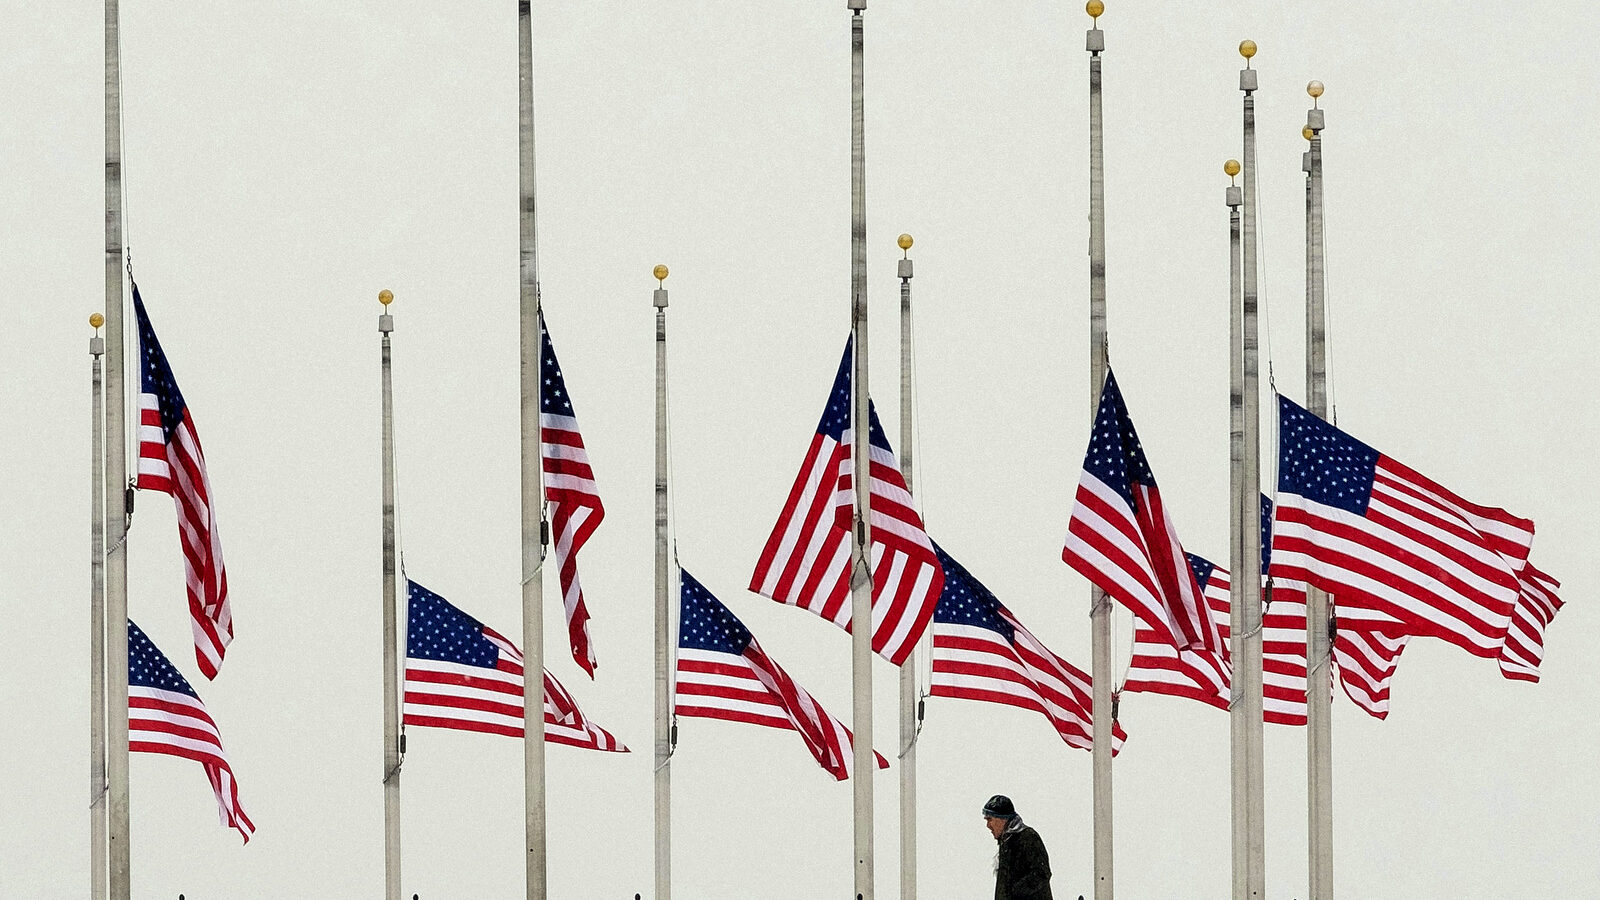 A vistor to the Washington Monument walks past flags flying a half-staff in honor of Supreme Court Justice Antonin Scalia on a wintry Presidents Day holiday in Washington, Monday, Feb, 15, 2016. (AP Photo/J. David Ake)